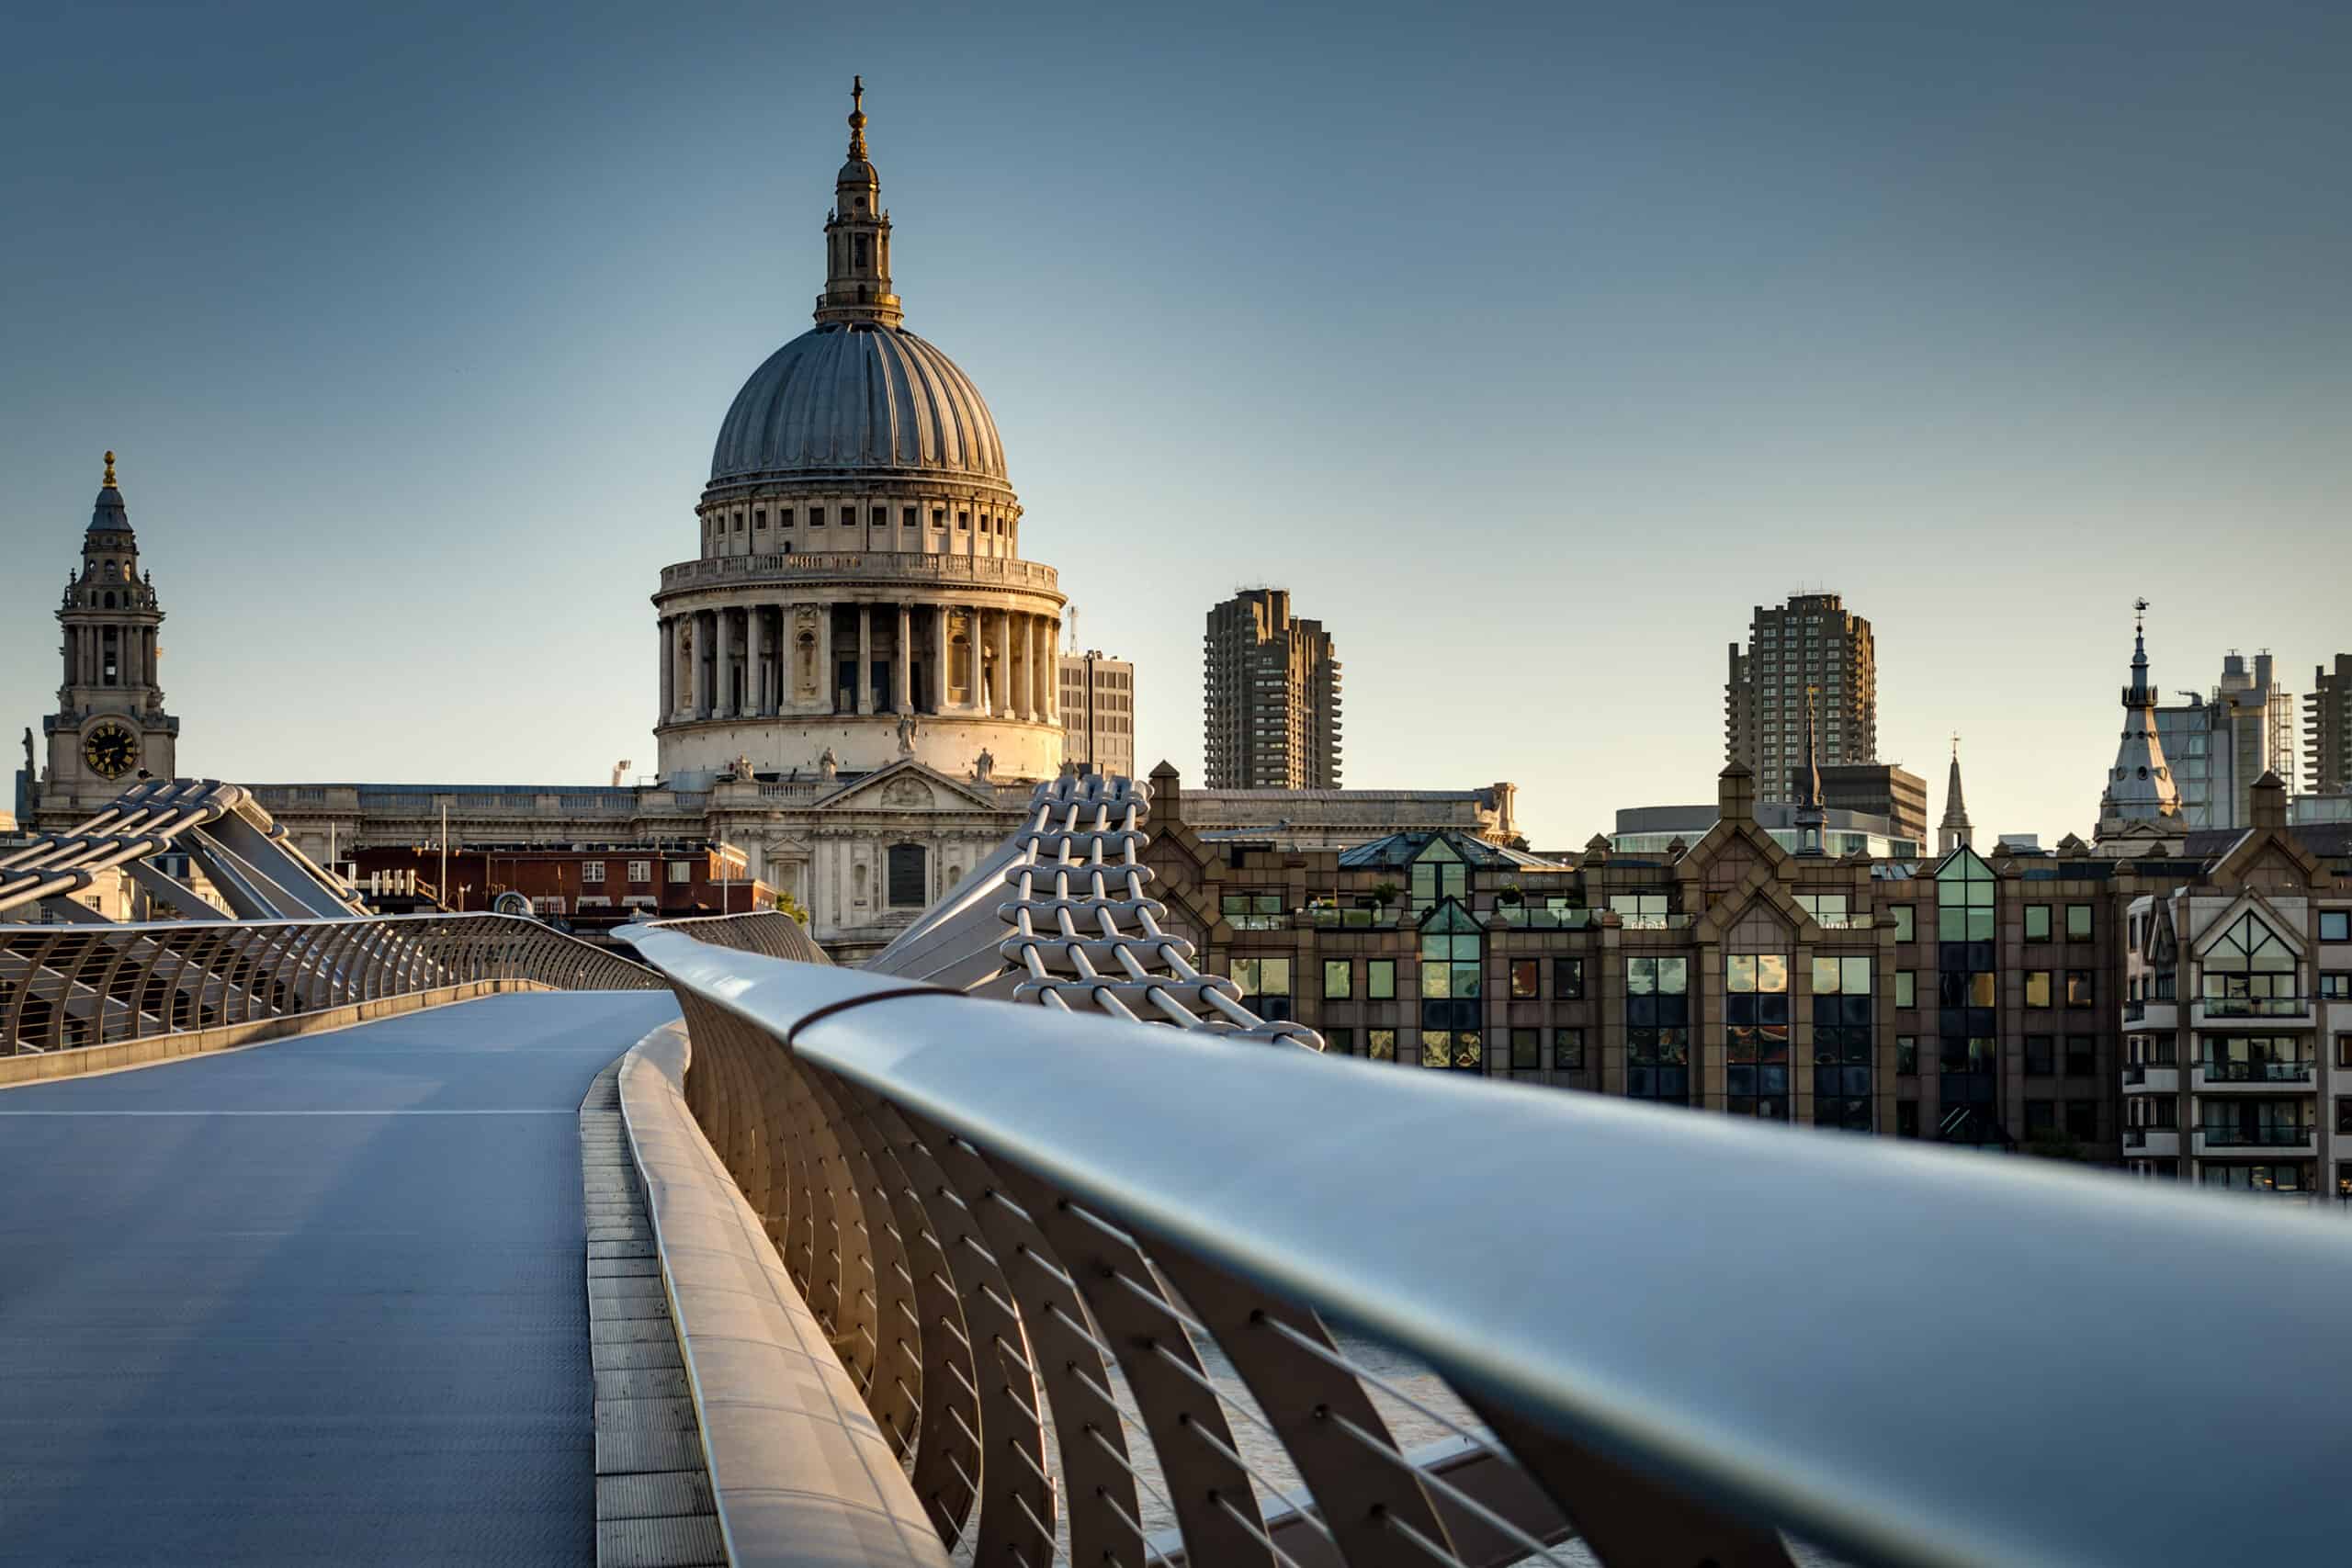 St. Pauls cathedral dome